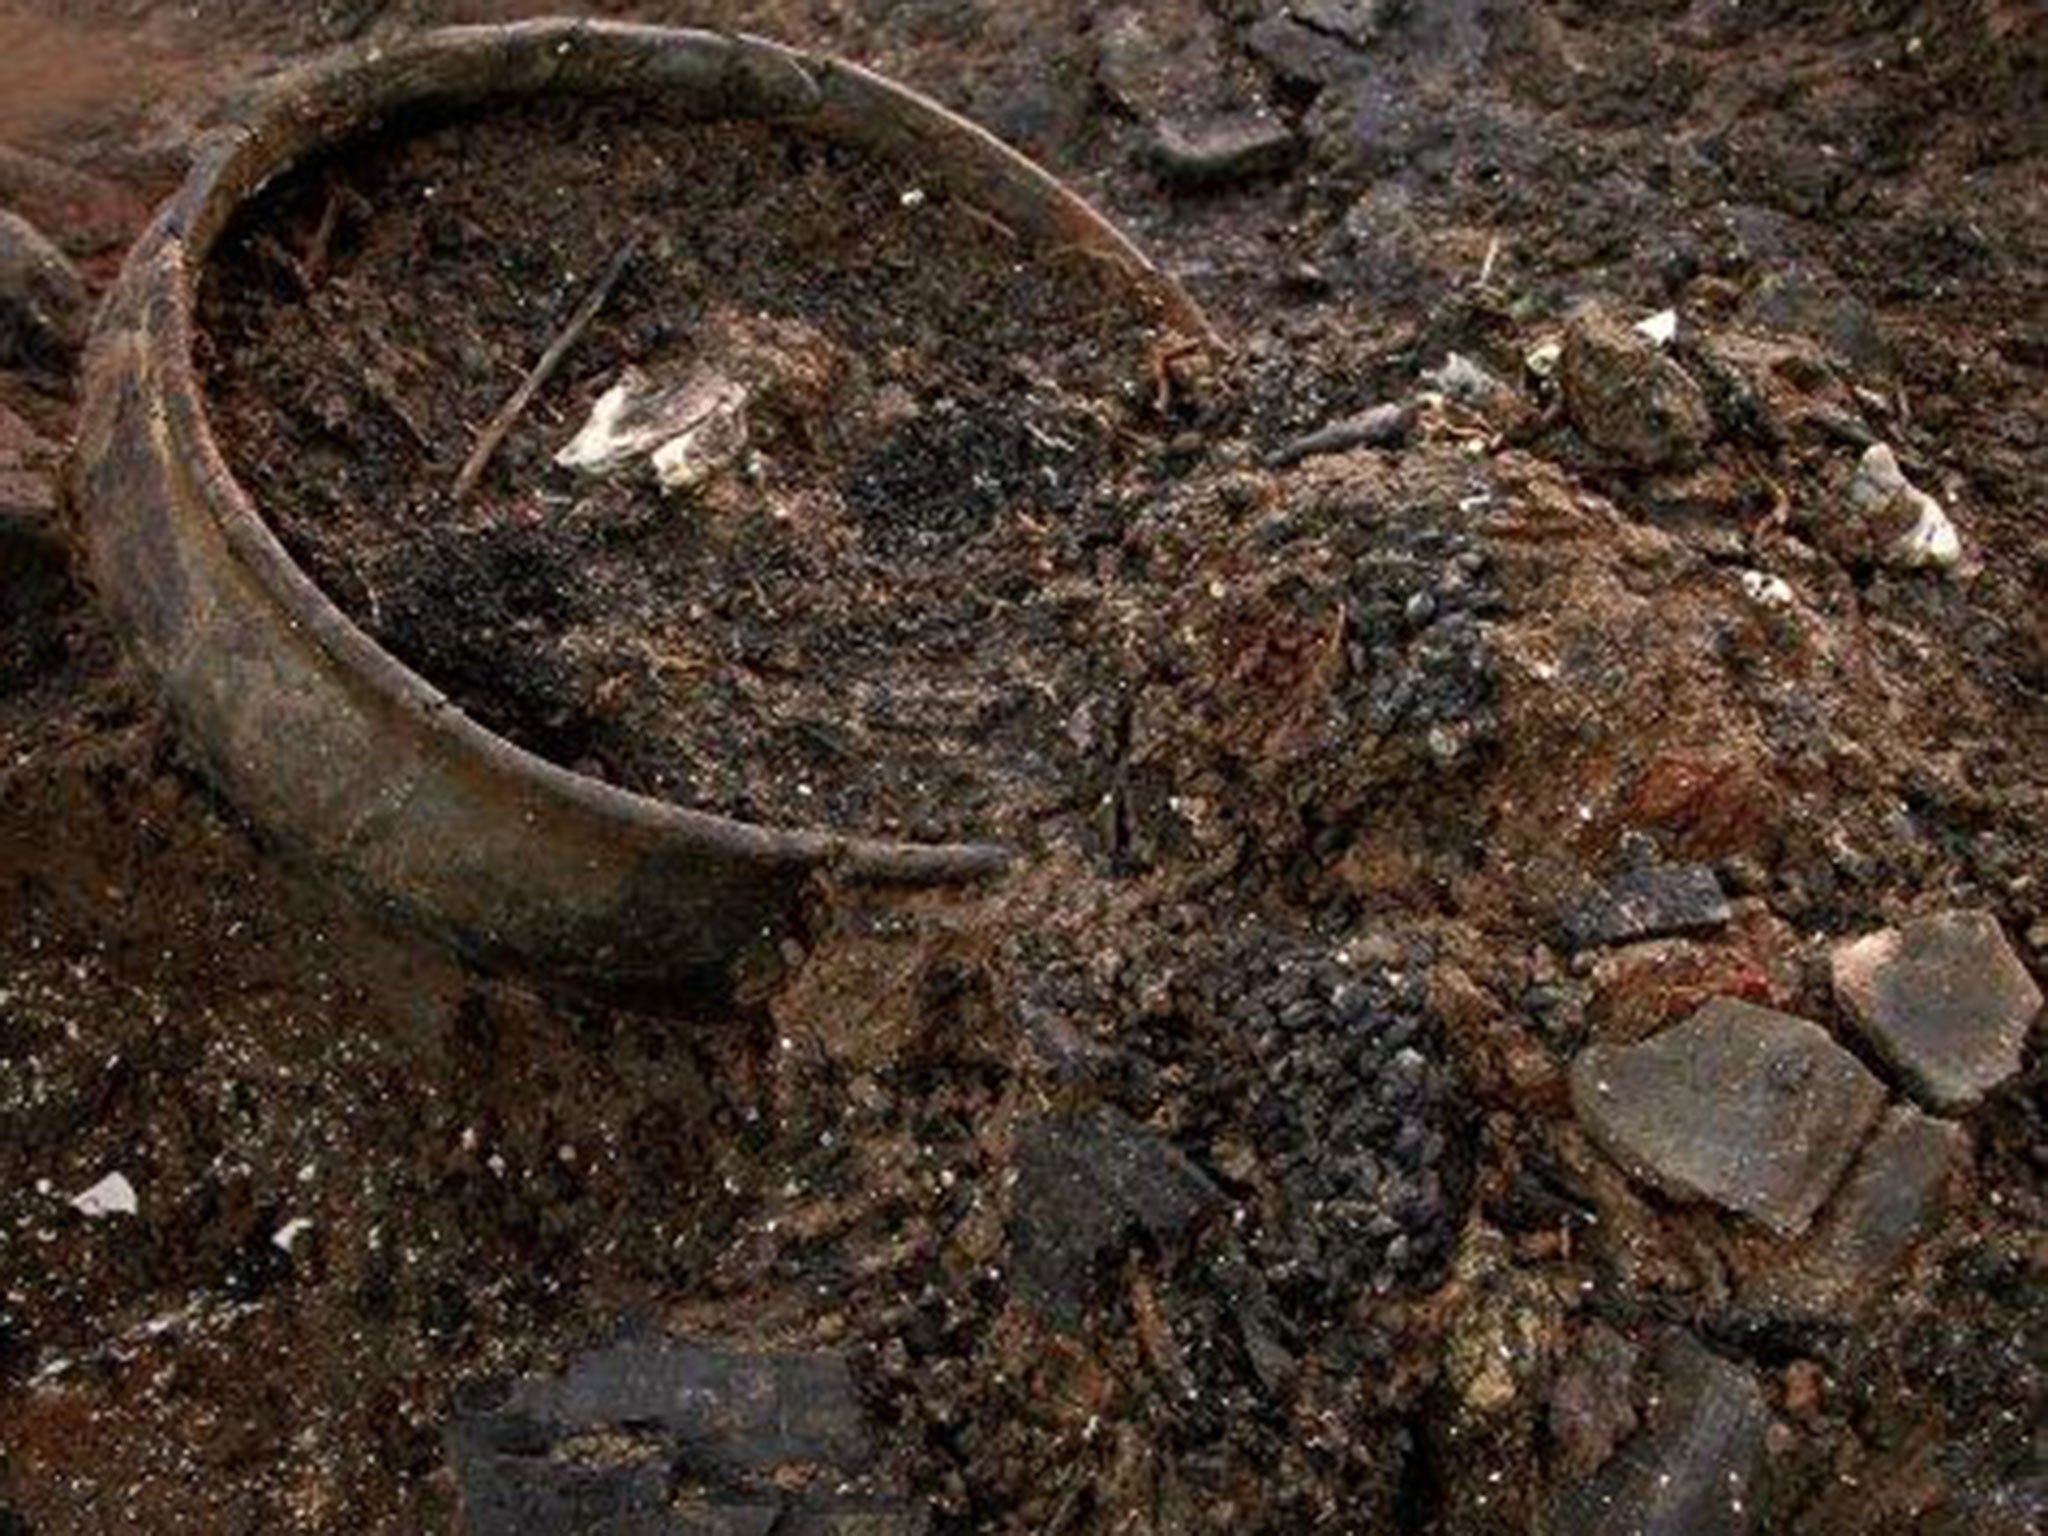 Pottery found at the site includes the remains of 60 cm tall storage jars and delicate 5 cm high burnished drinking beakers